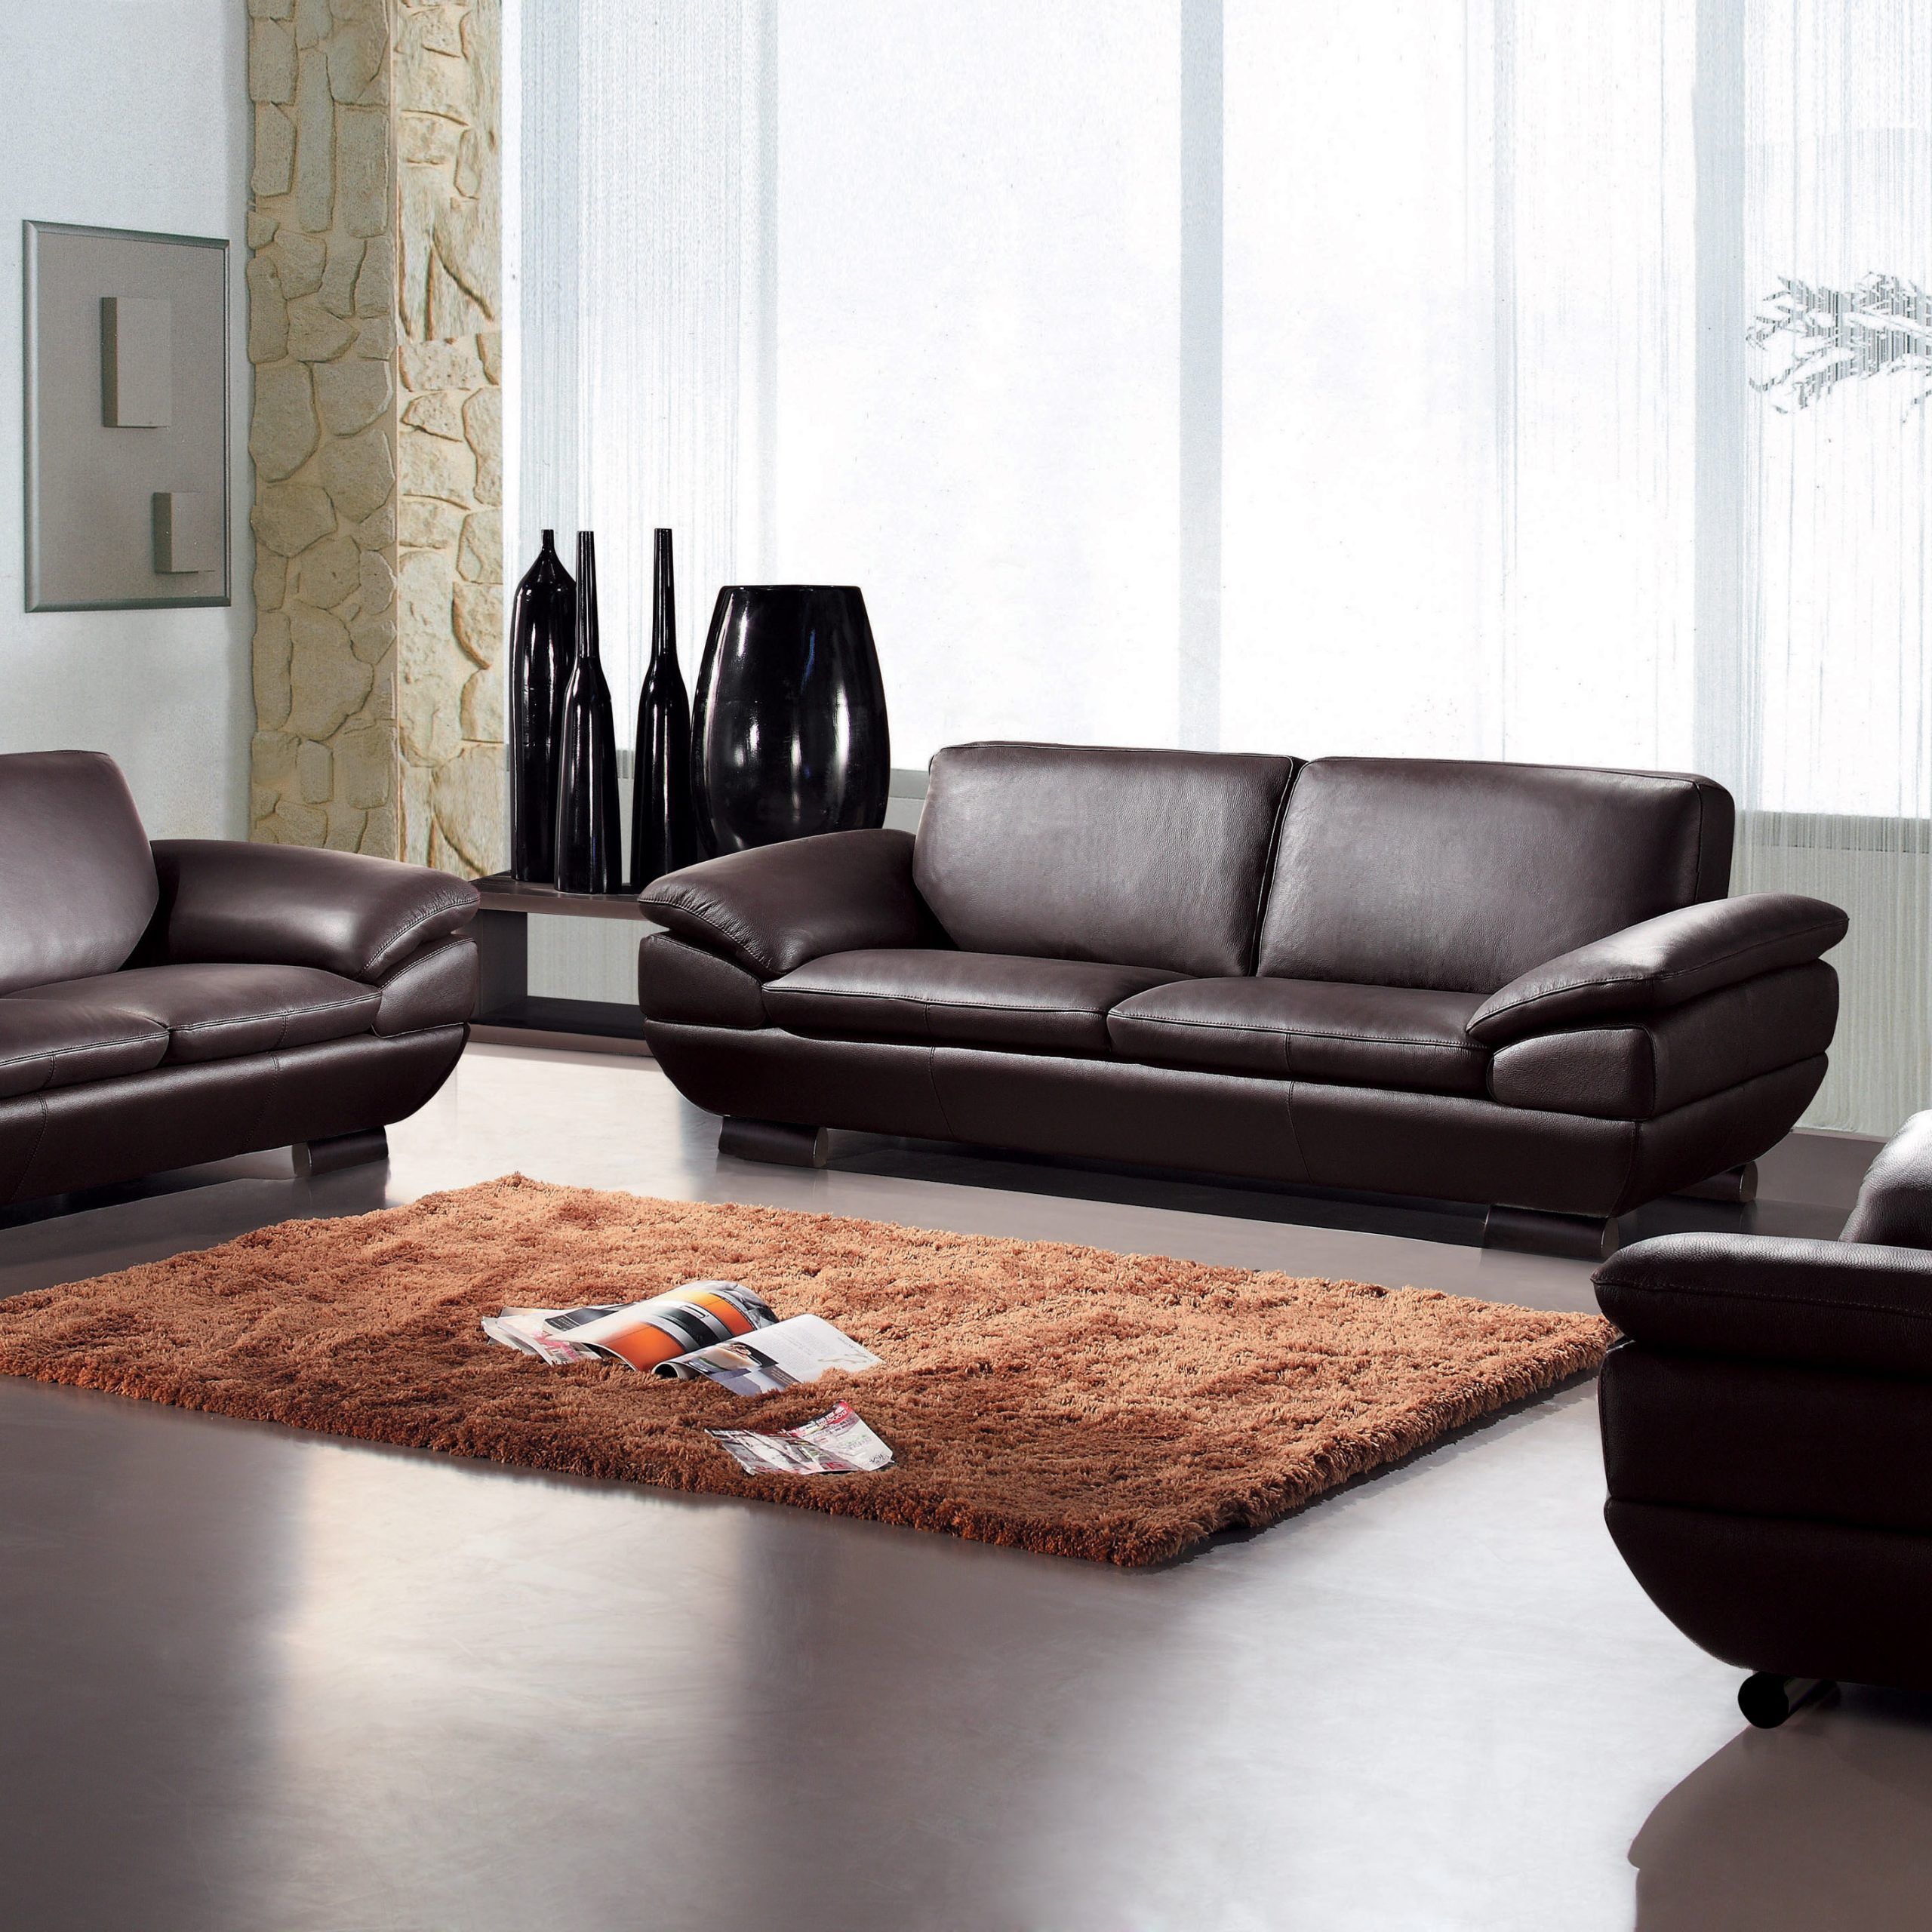 Contemporary Three Piece Sofa Set In Dark Brown Leather Atlanta Georgia With Regard To 3 Piece Leather Sectional Sofa Sets (View 18 of 20)